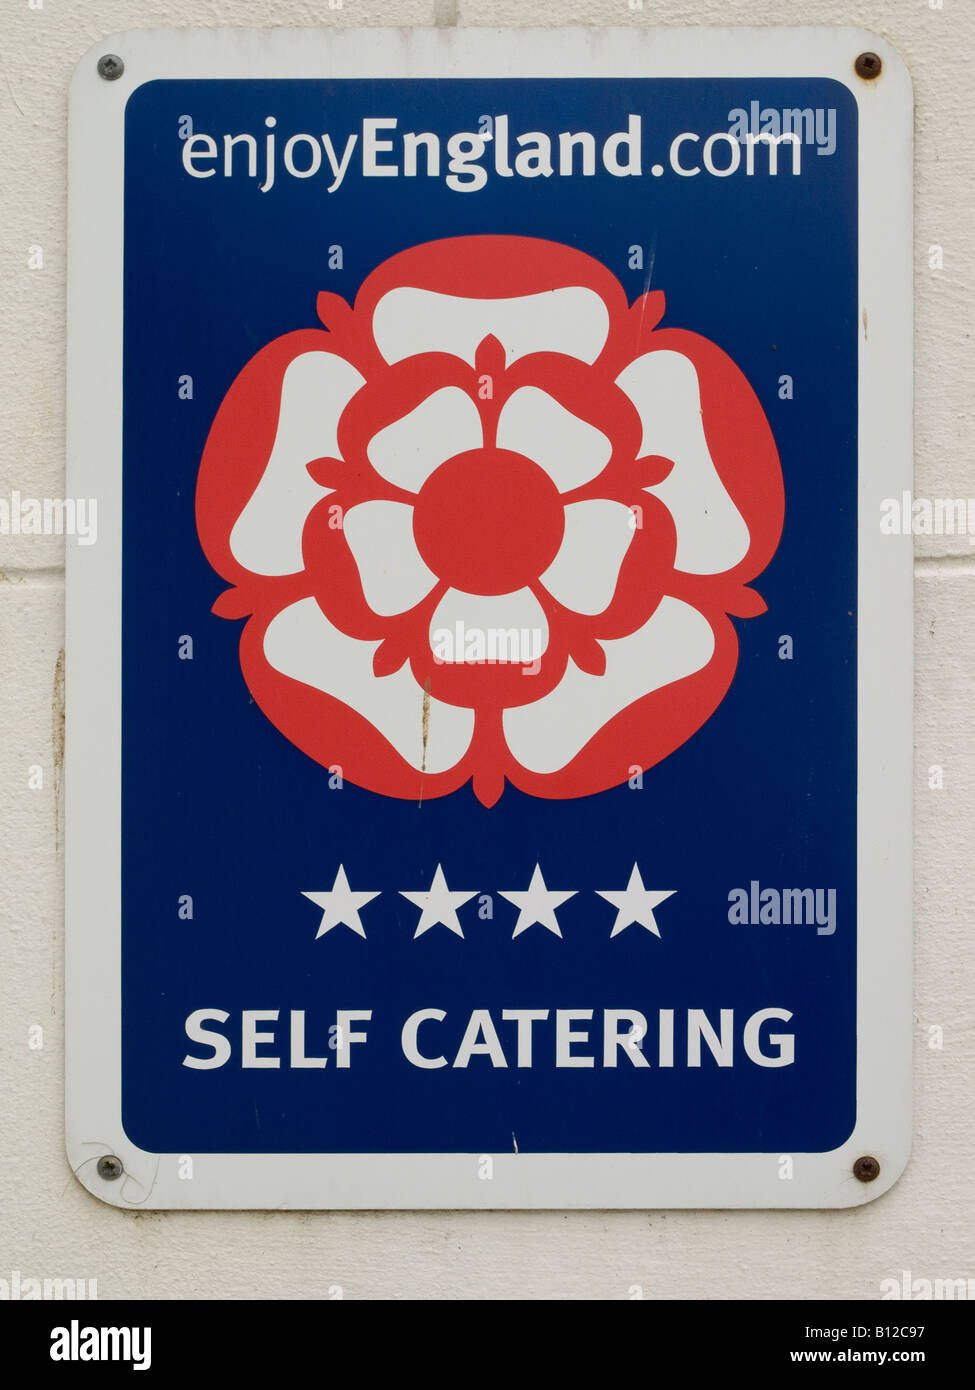 Sign showing self catering tourist accommodation is of 4 star quality and endorsed by enjoyengland.com Stock Photo